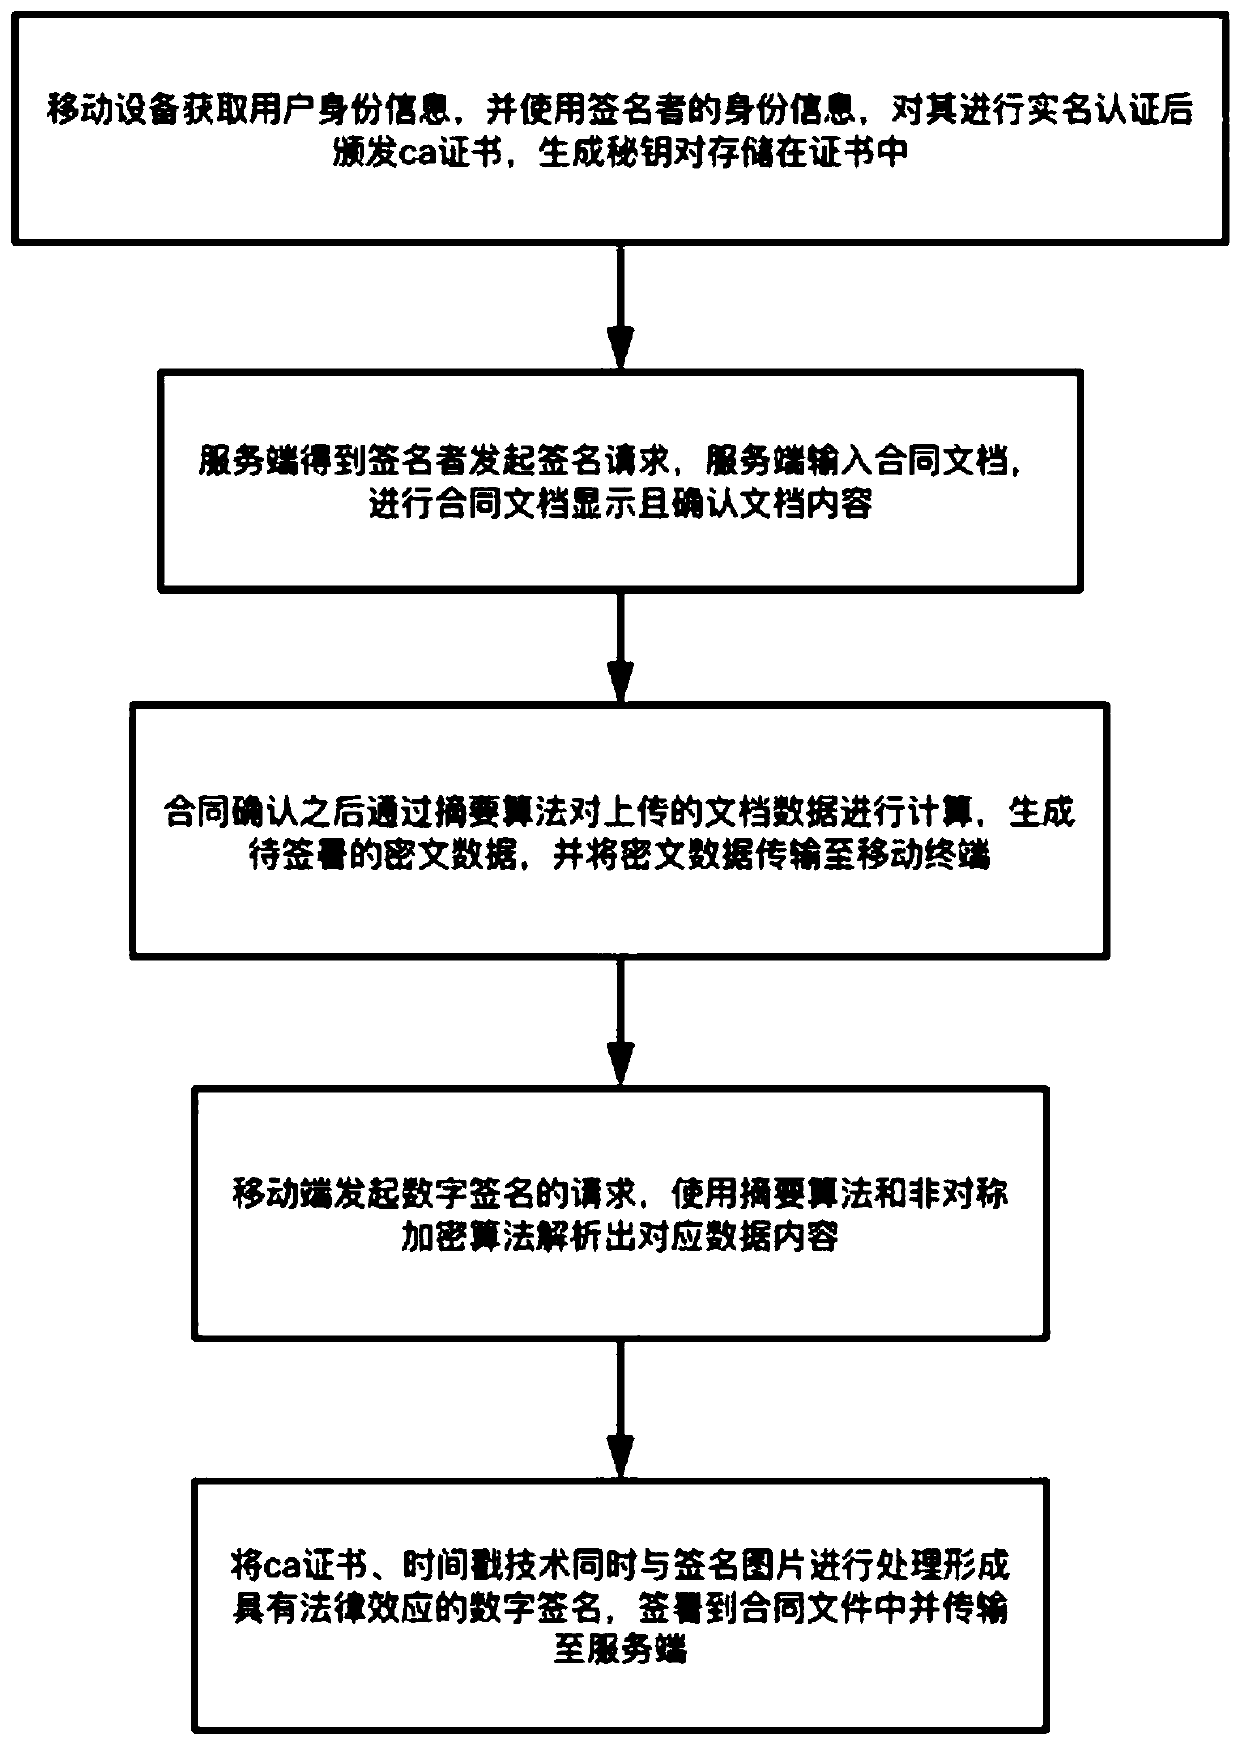 Efficient credible electronic signature system and method based on mobile equipment